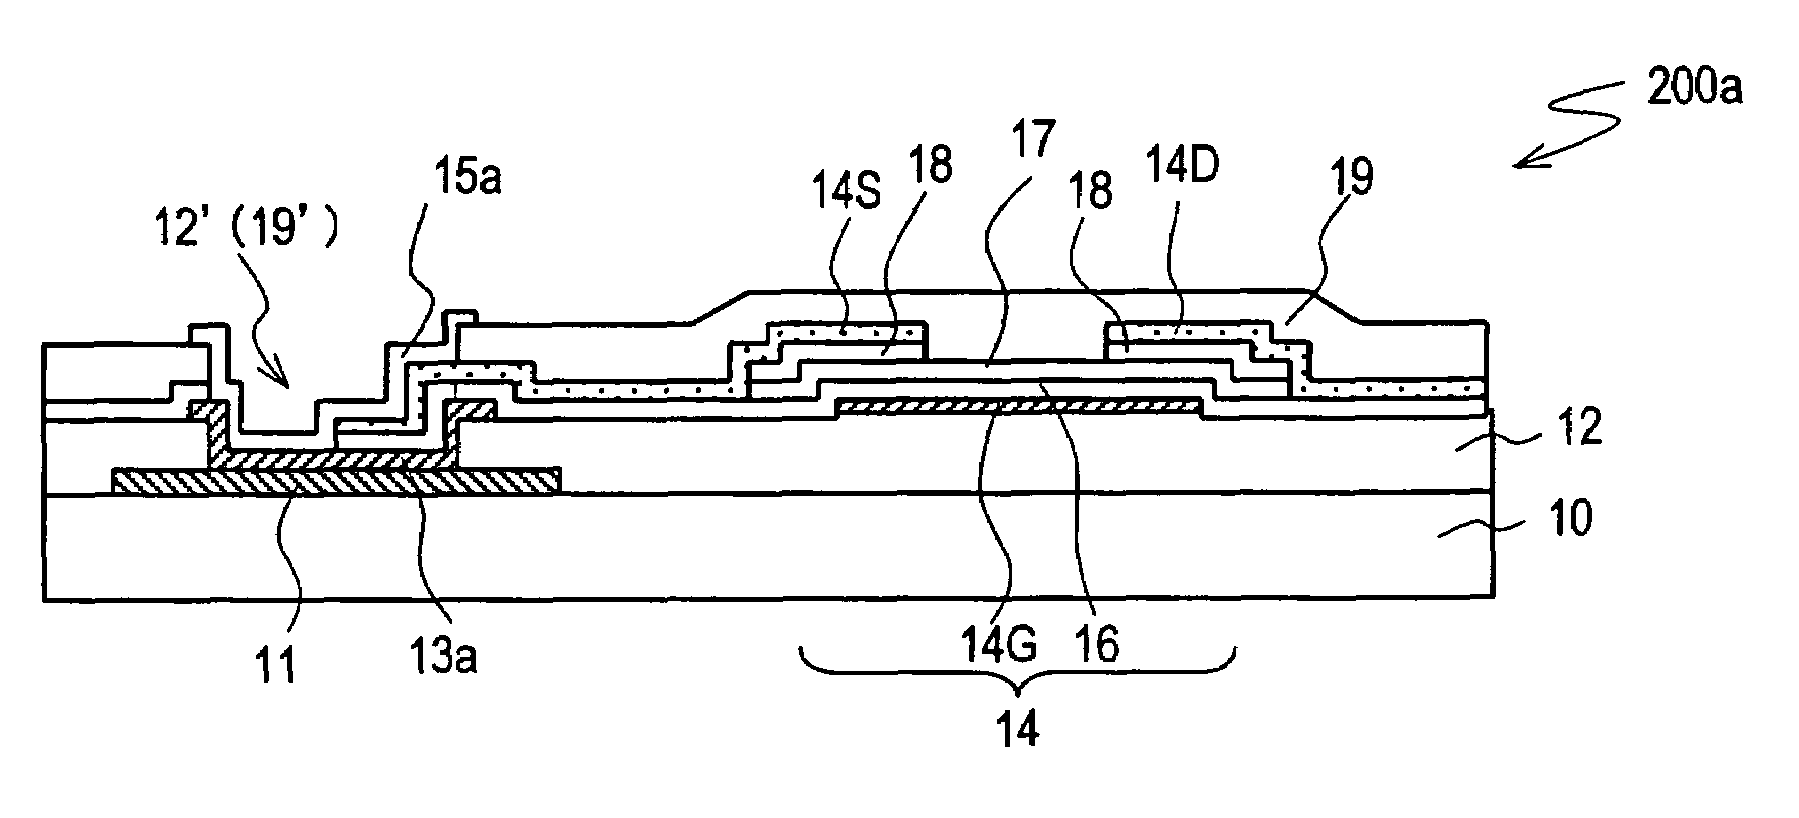 Active-matrix substrate and display device including the substrate wherein a bottom-gate TFT has data lines formed below the gate lines